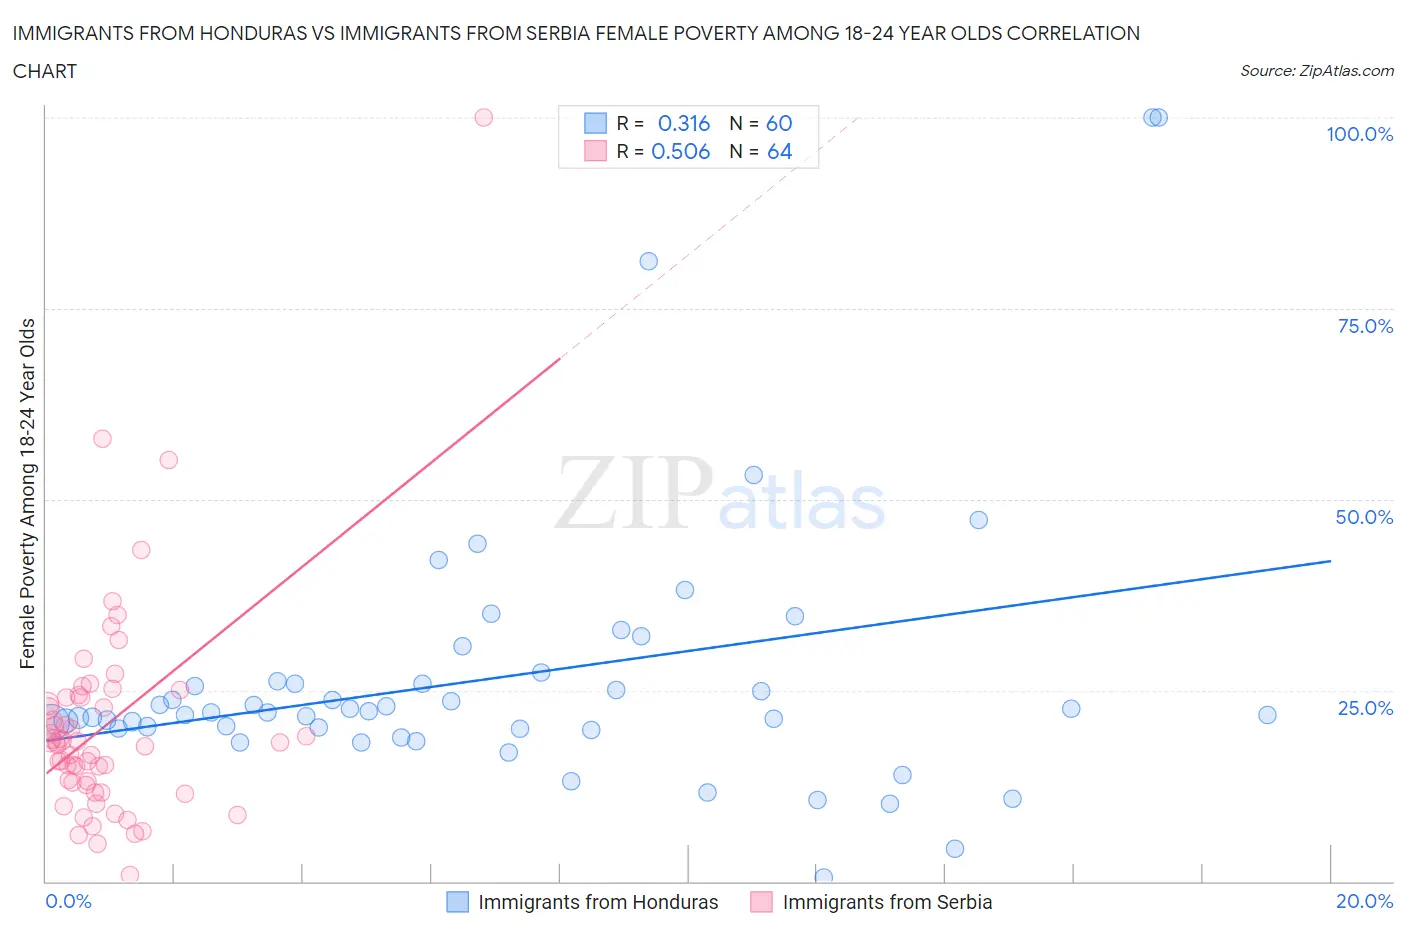 Immigrants from Honduras vs Immigrants from Serbia Female Poverty Among 18-24 Year Olds